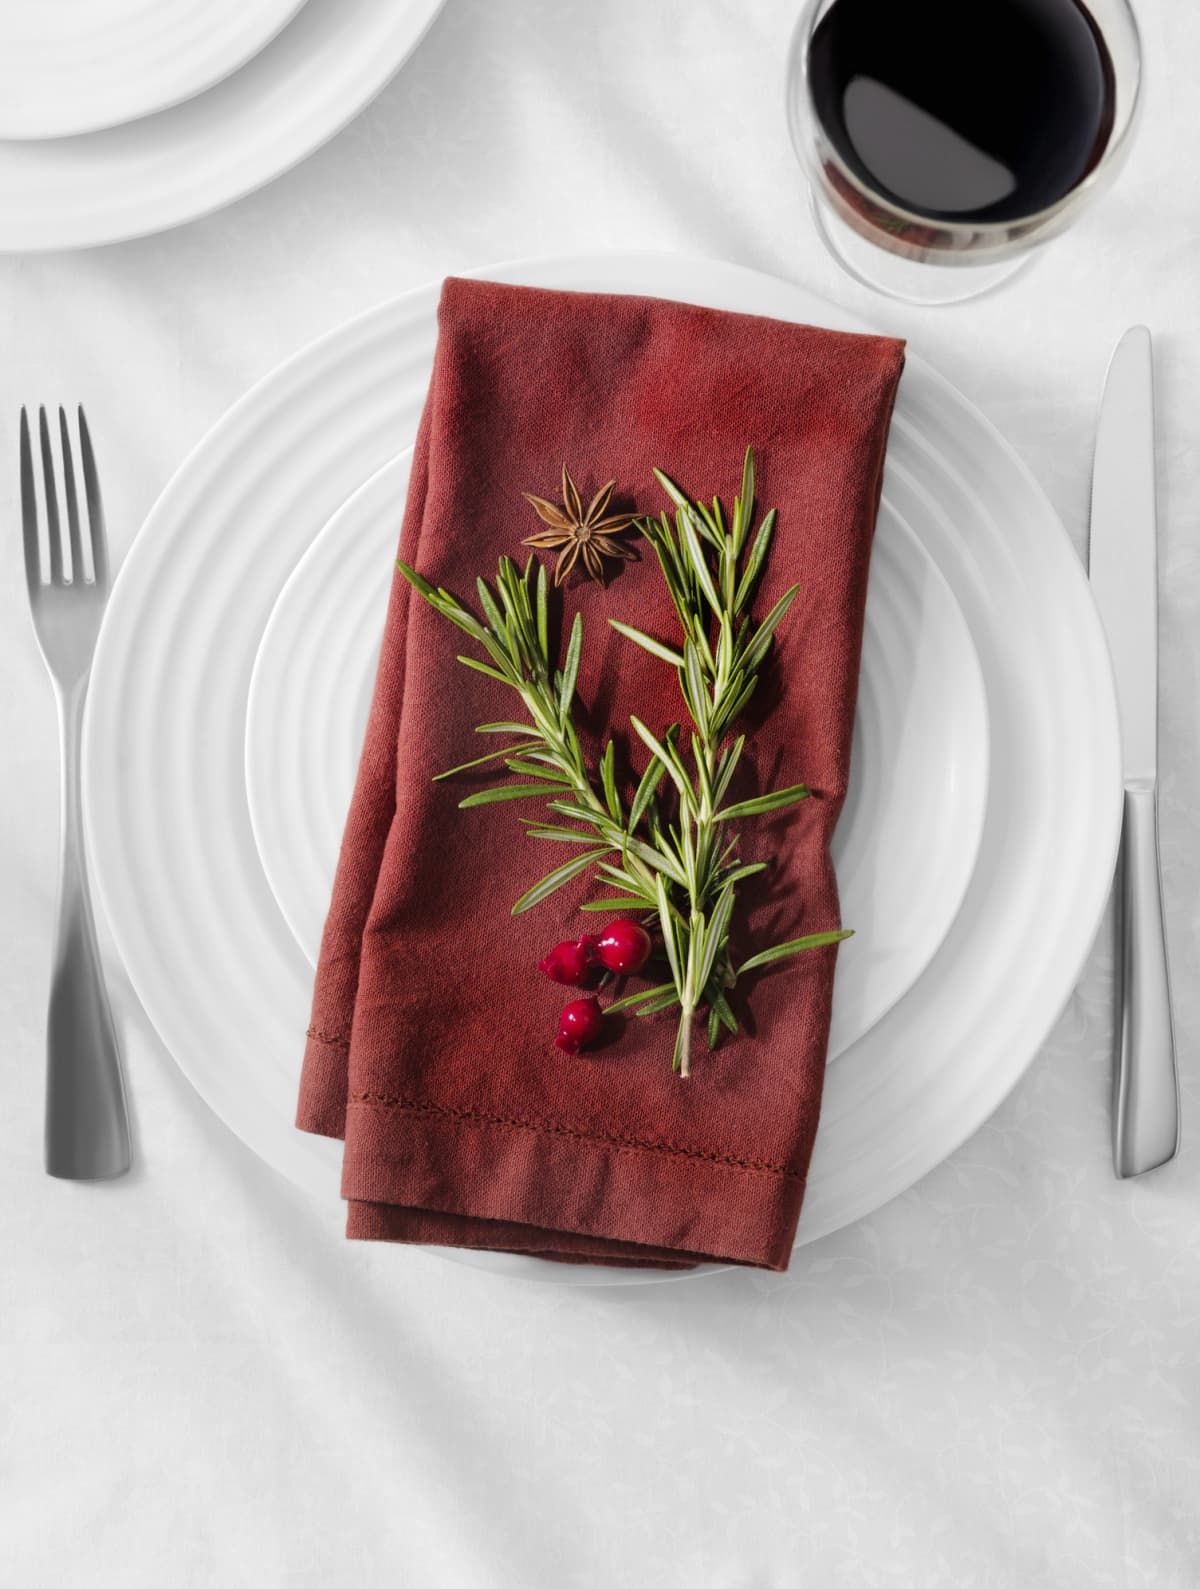 Napkin placed on a plate on a table.